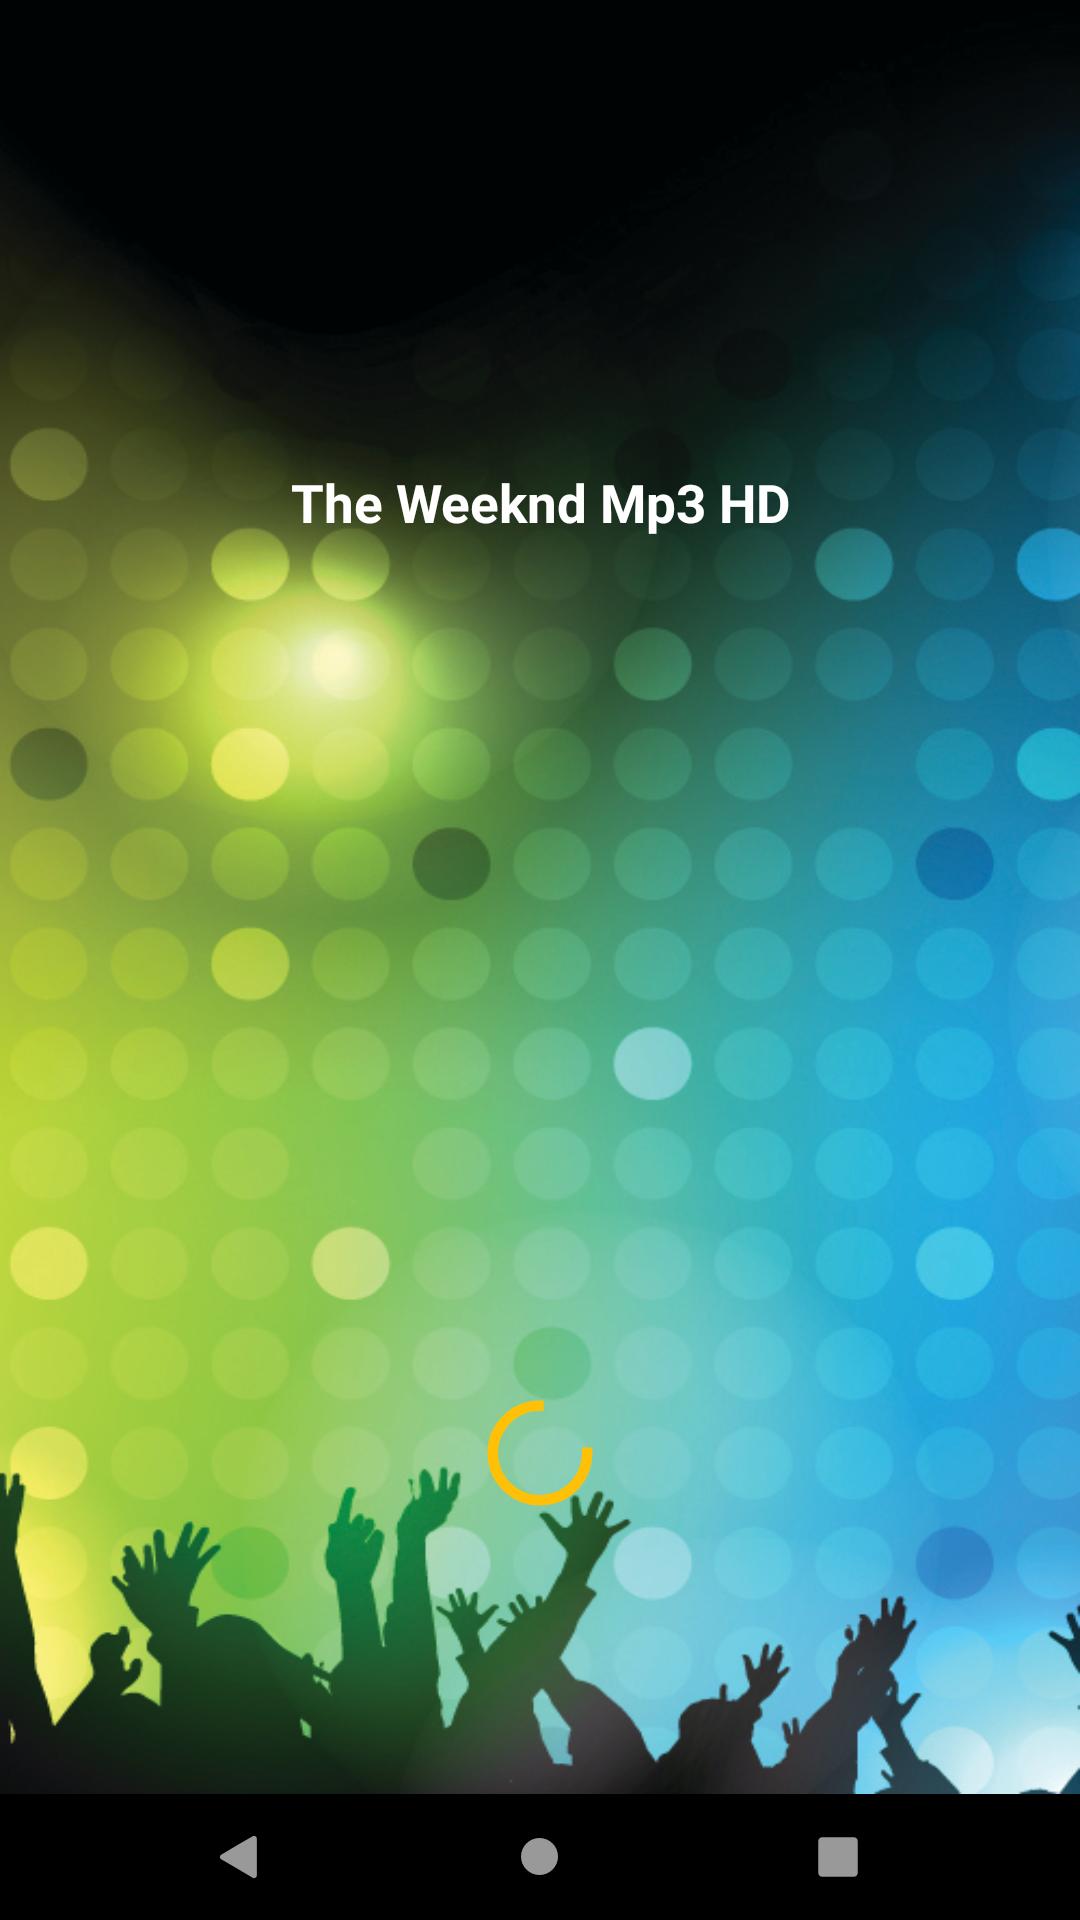 The Weeknd - Blinding Lights Mp3 Offline for Android - APK Download